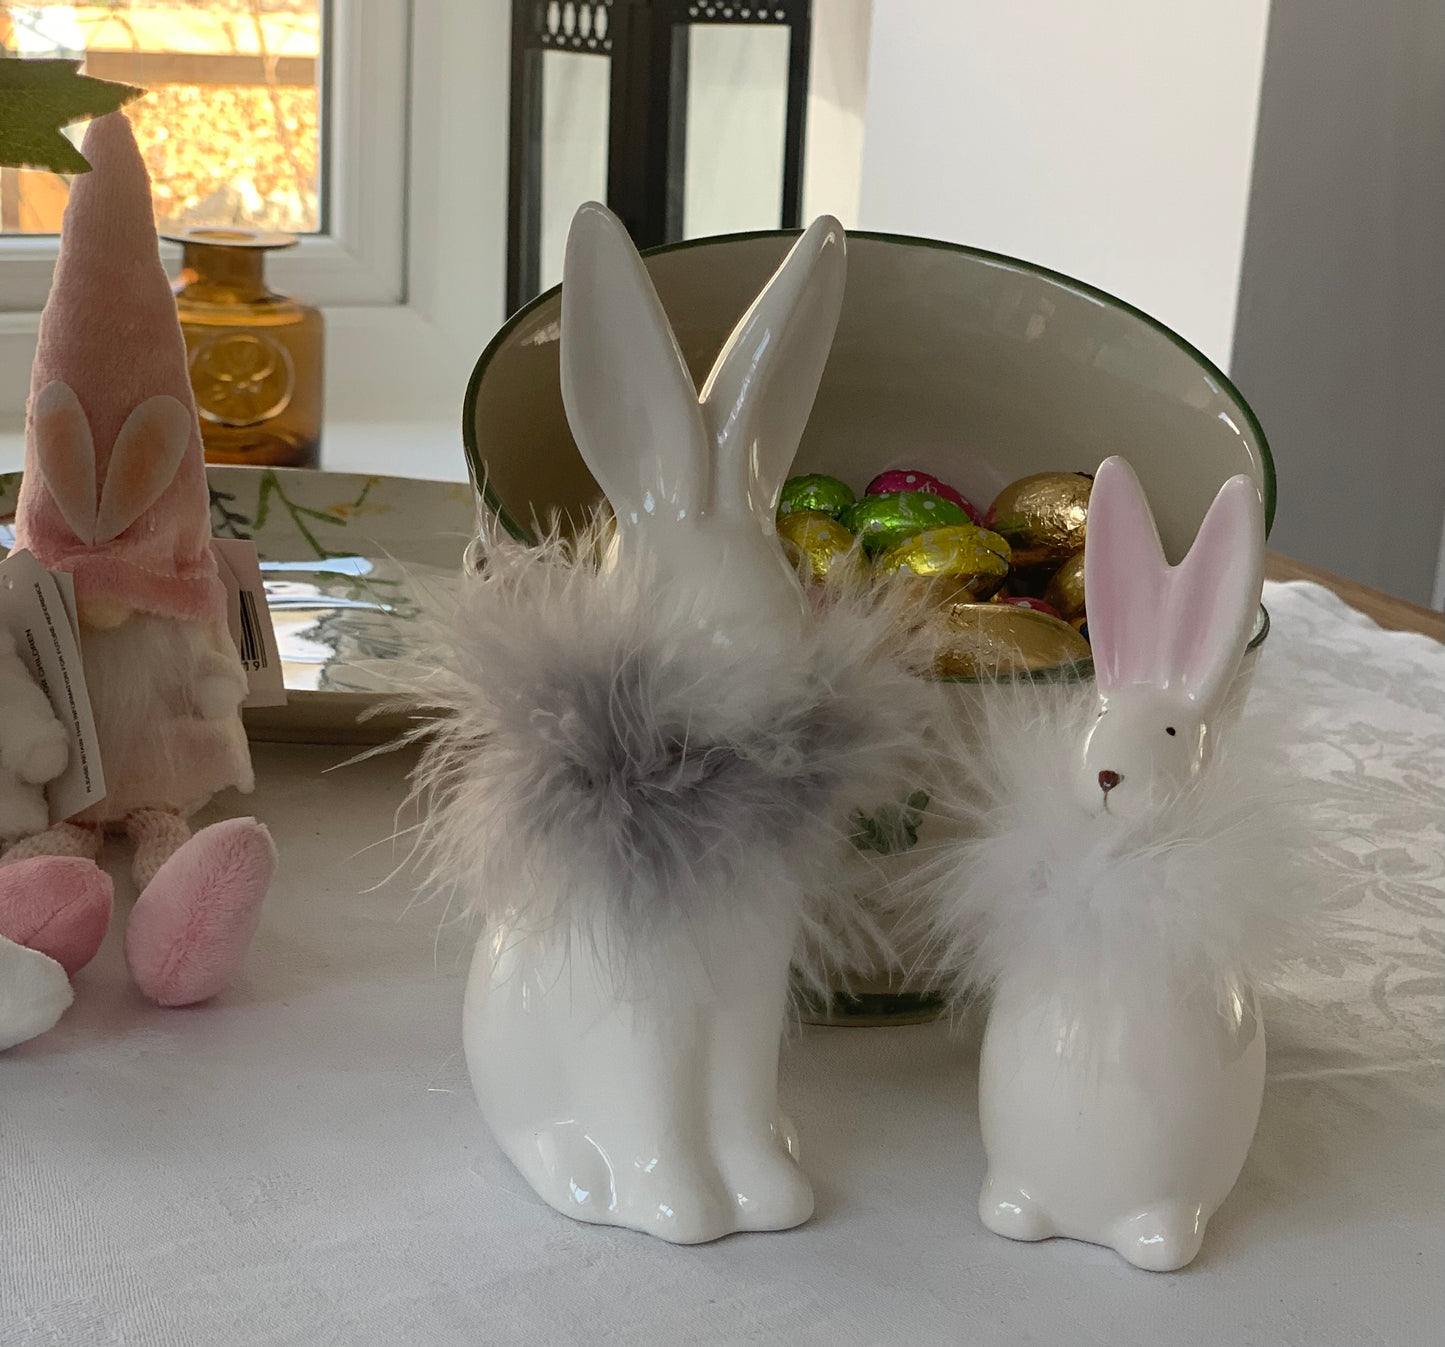 Set of 2 Ceramic Rabbits with Feathered Necks (small)